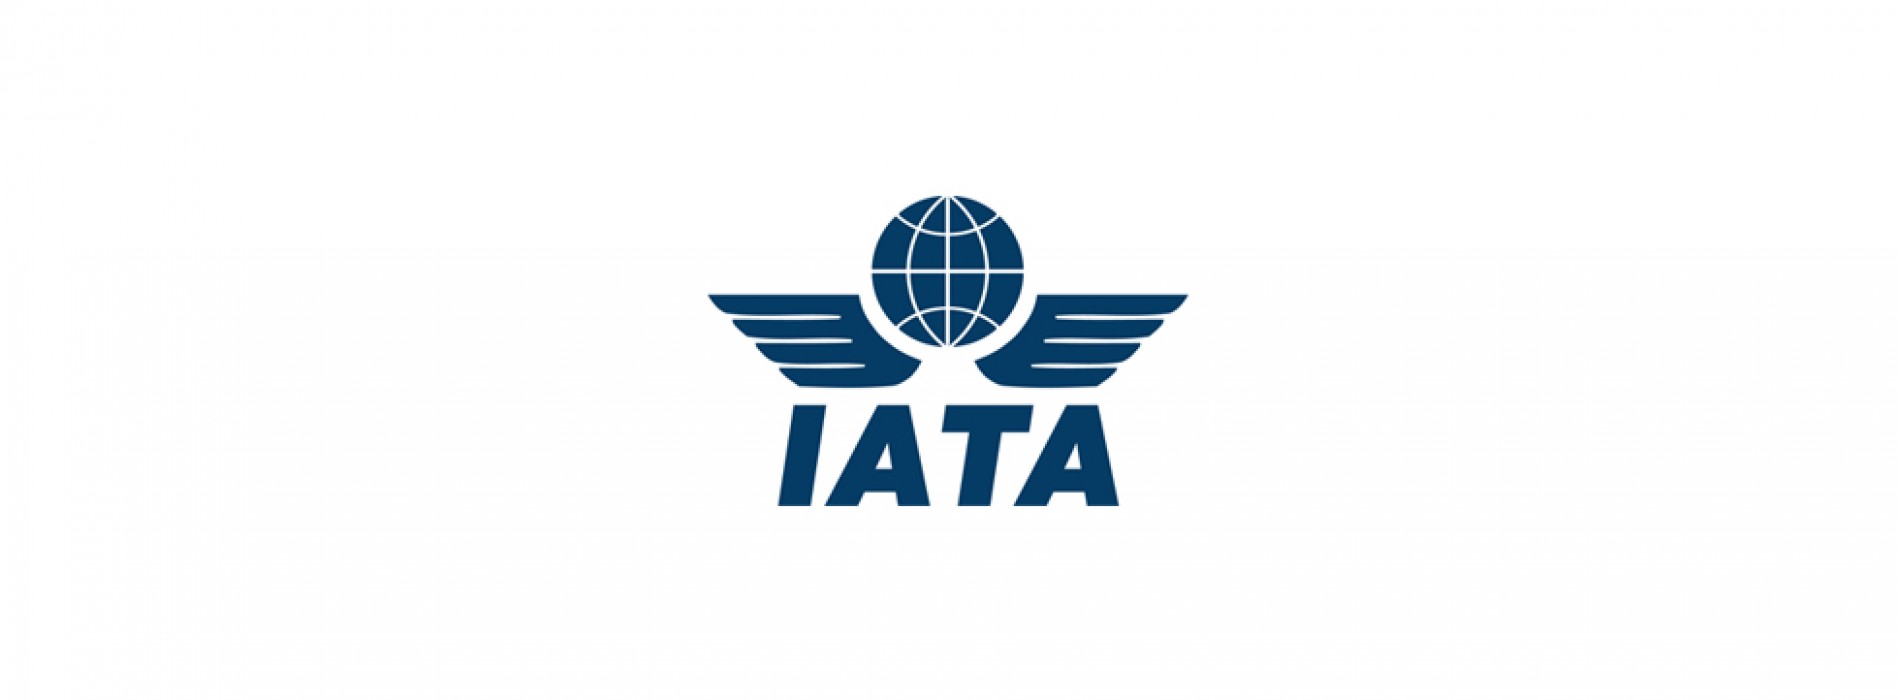 Indian aviation can grow only if government slashes taxes, warns IATA